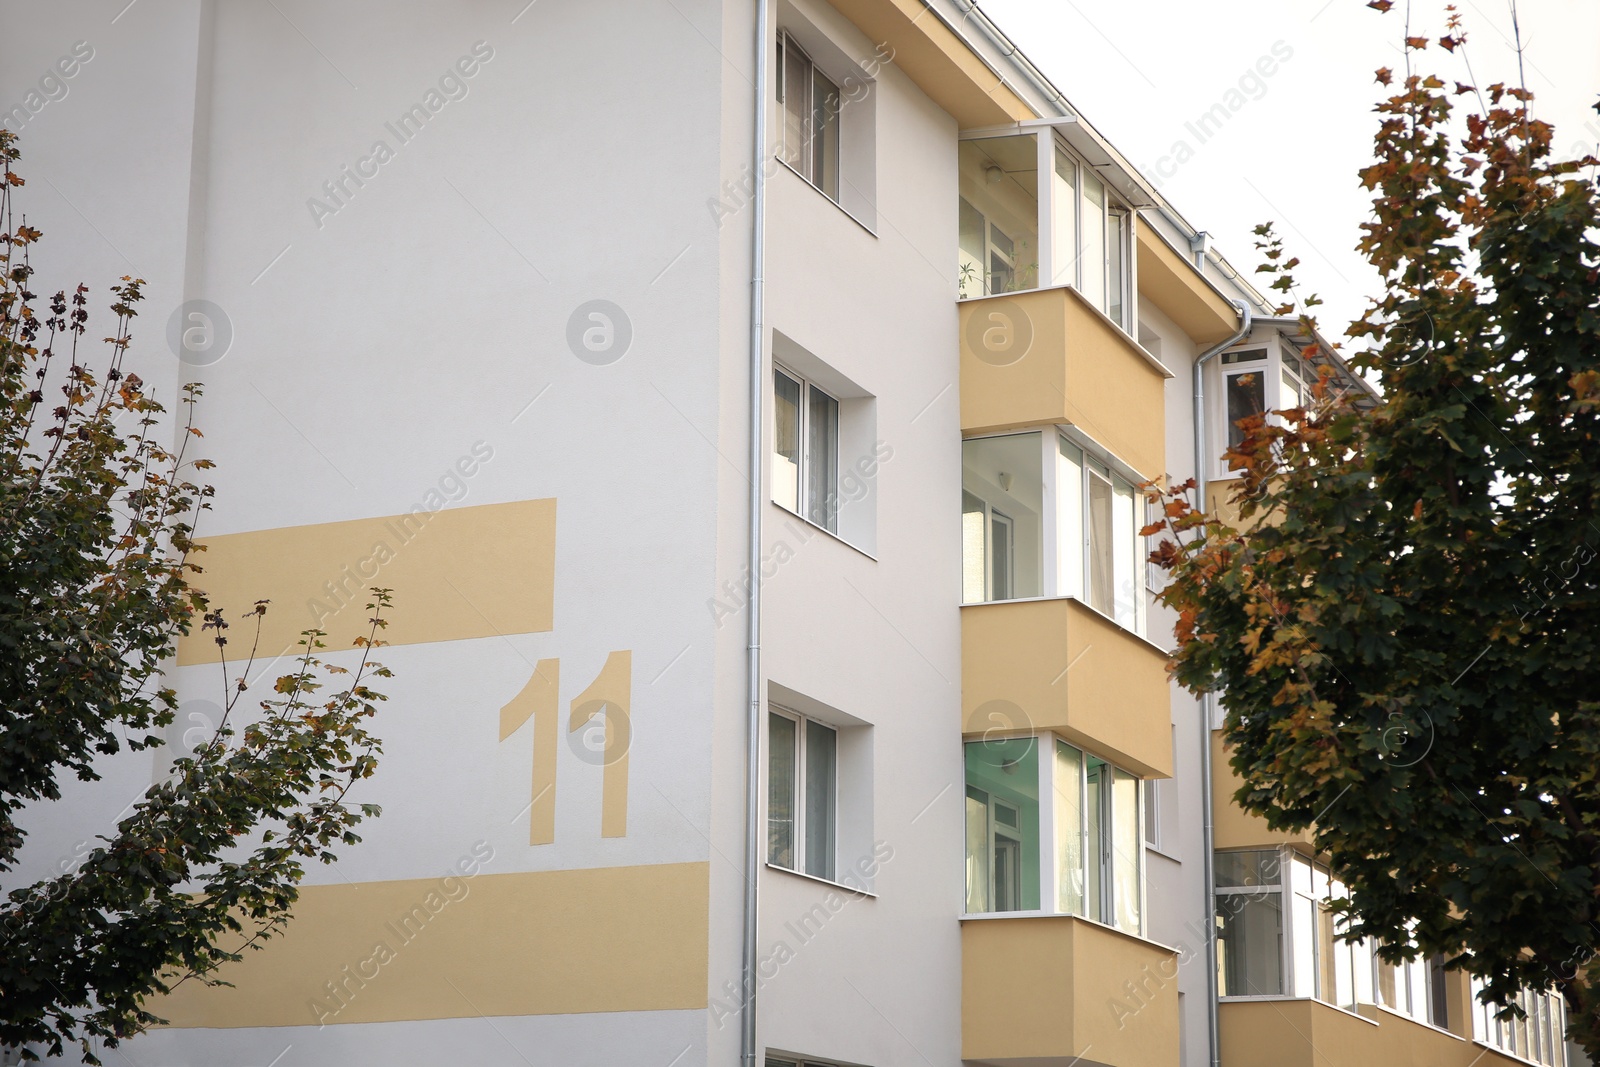 Photo of House number eleven on beige wall outdoors